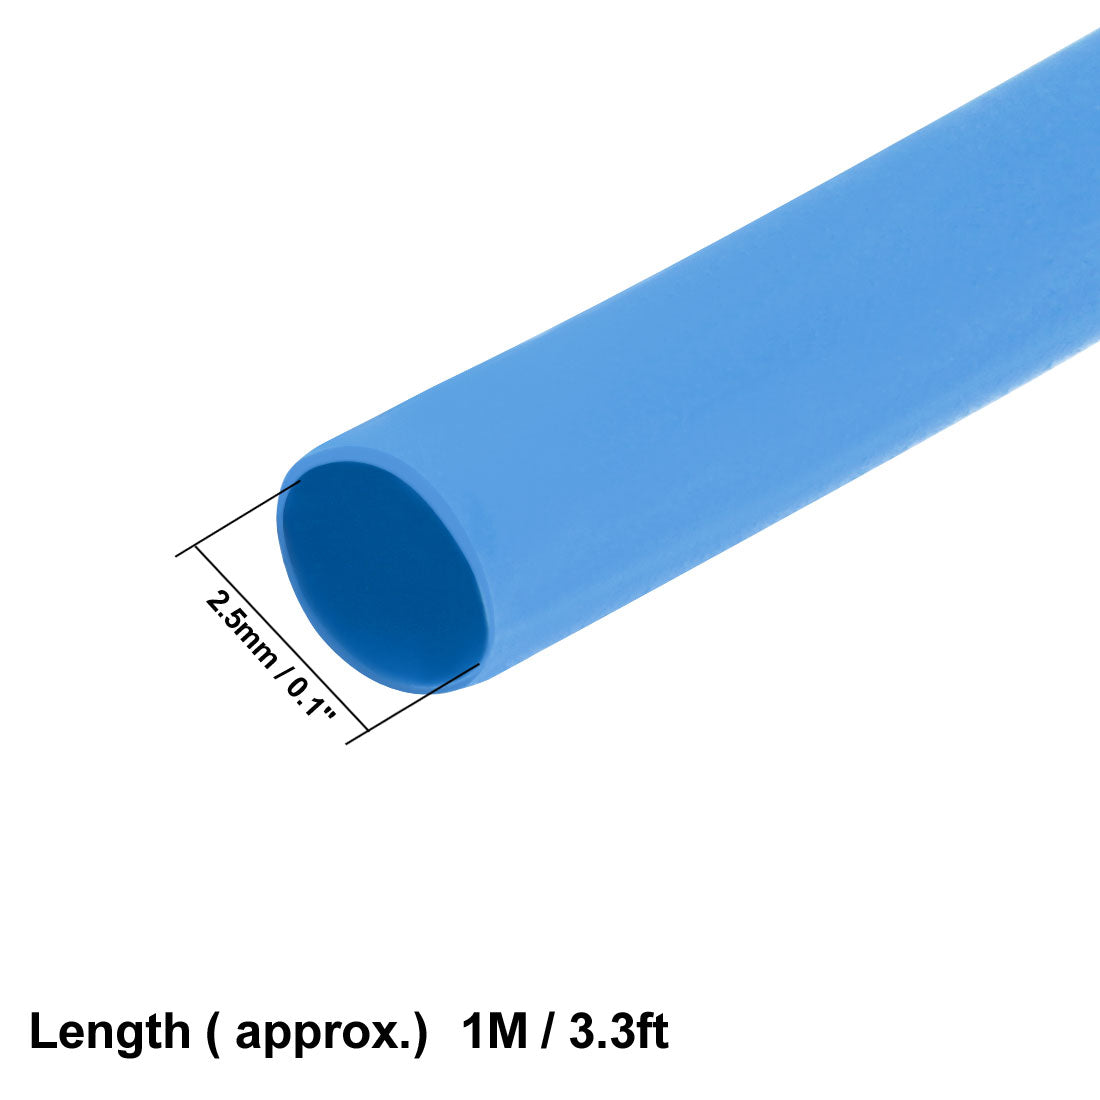 uxcell Uxcell Heat Shrink Tube 2:1 Electrical Insulation Tube Wire Cable Tubing Sleeving Wrap Blue 2.5mm Diameter 1m Long